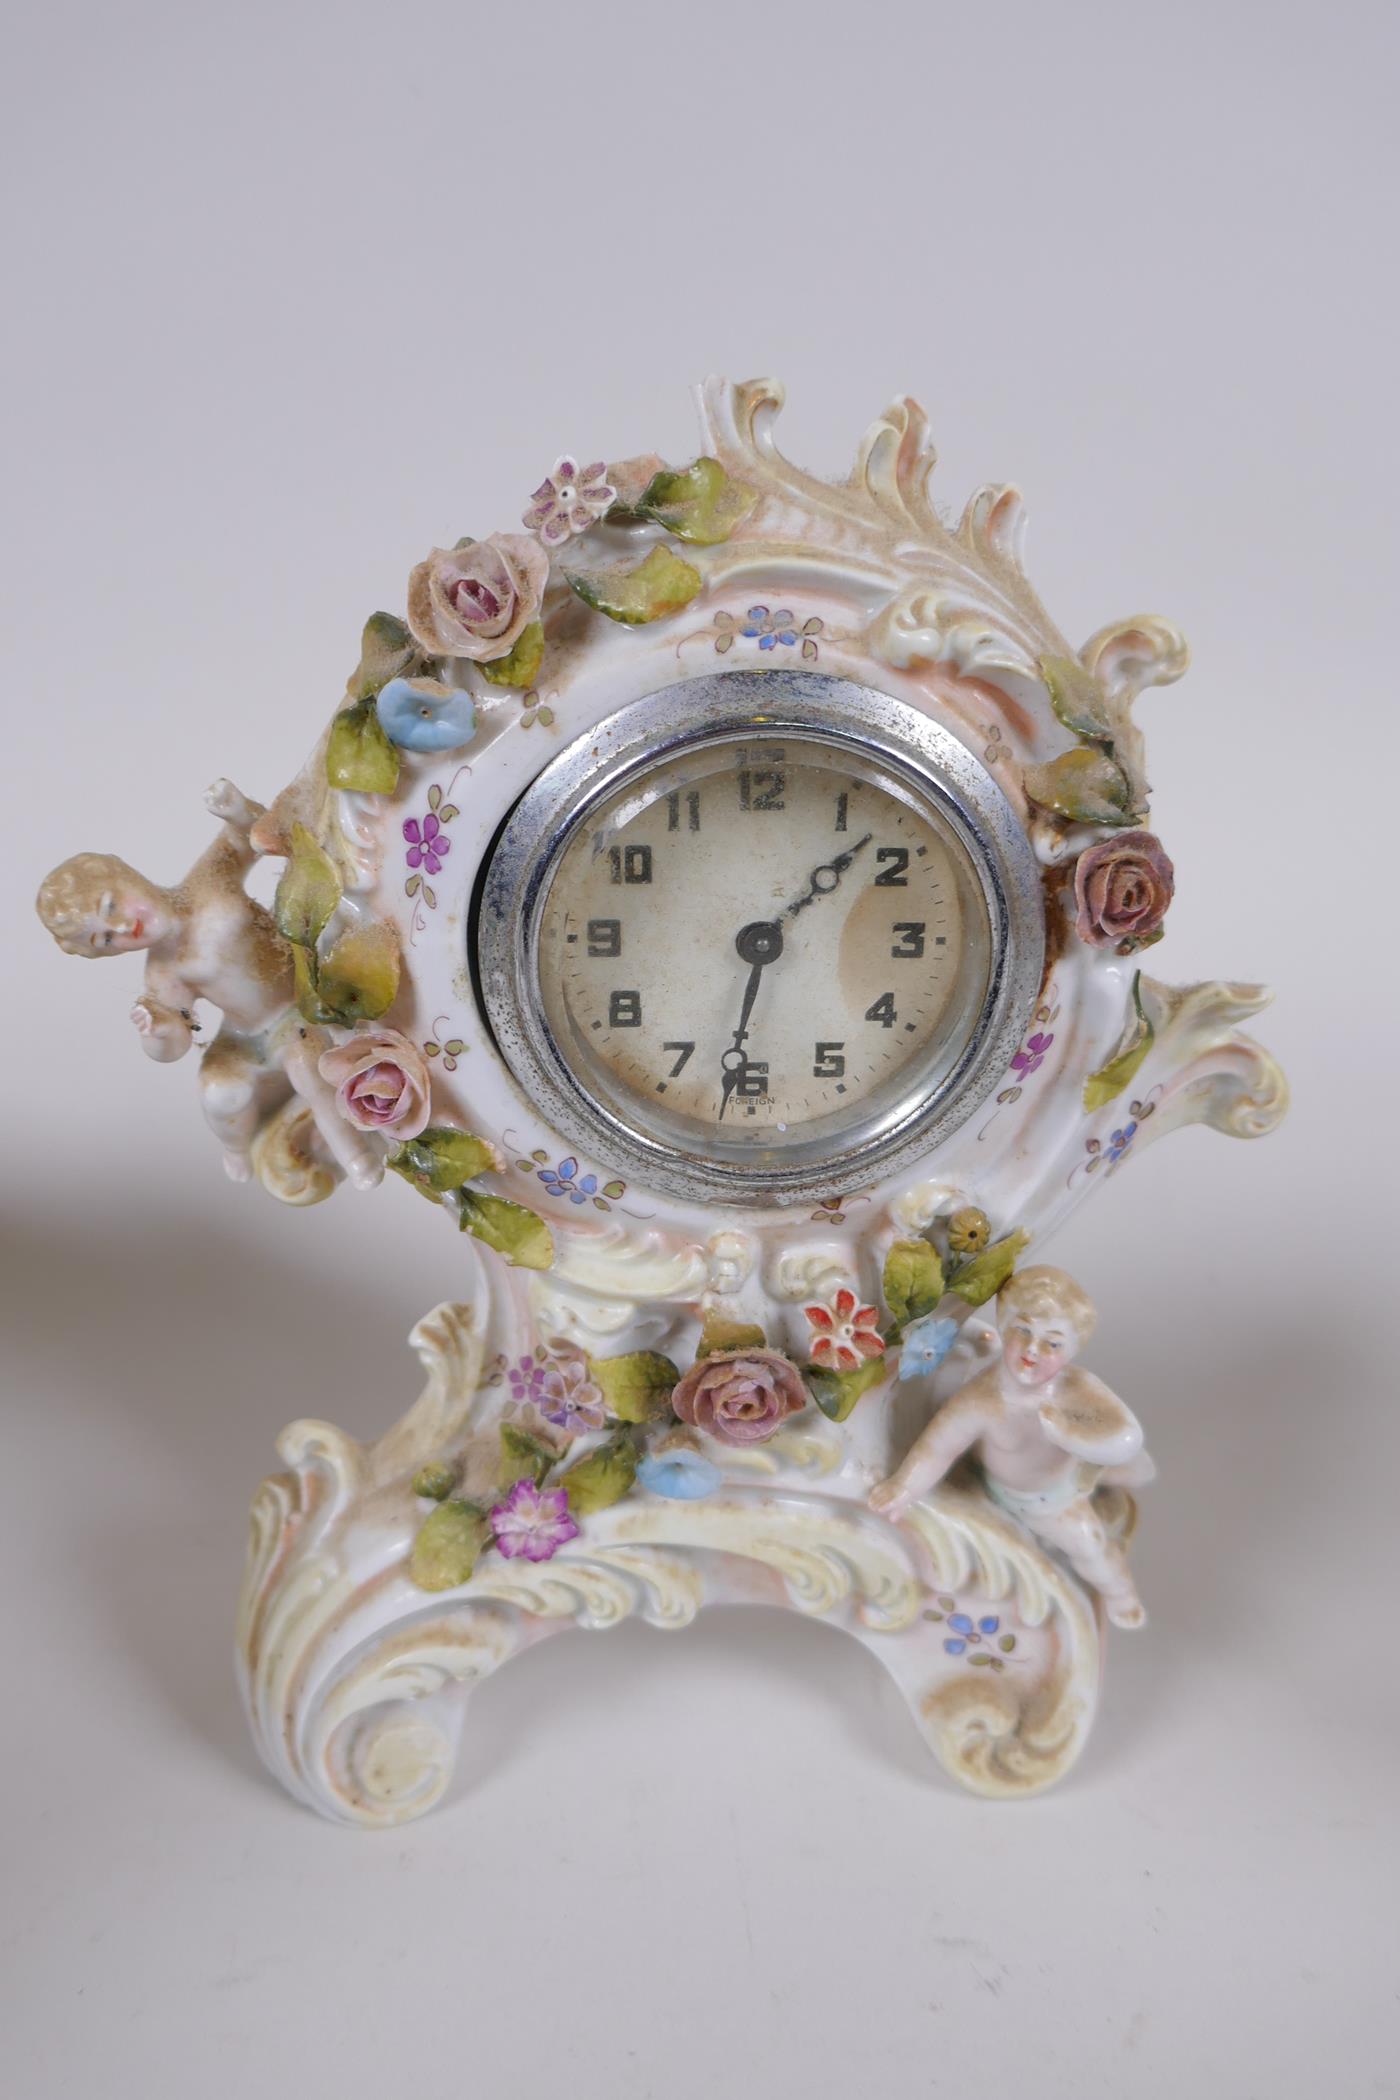 A collection of late C19th/early C20th Dresden porcelain, including a desk clock, trinket dishes, - Image 8 of 8